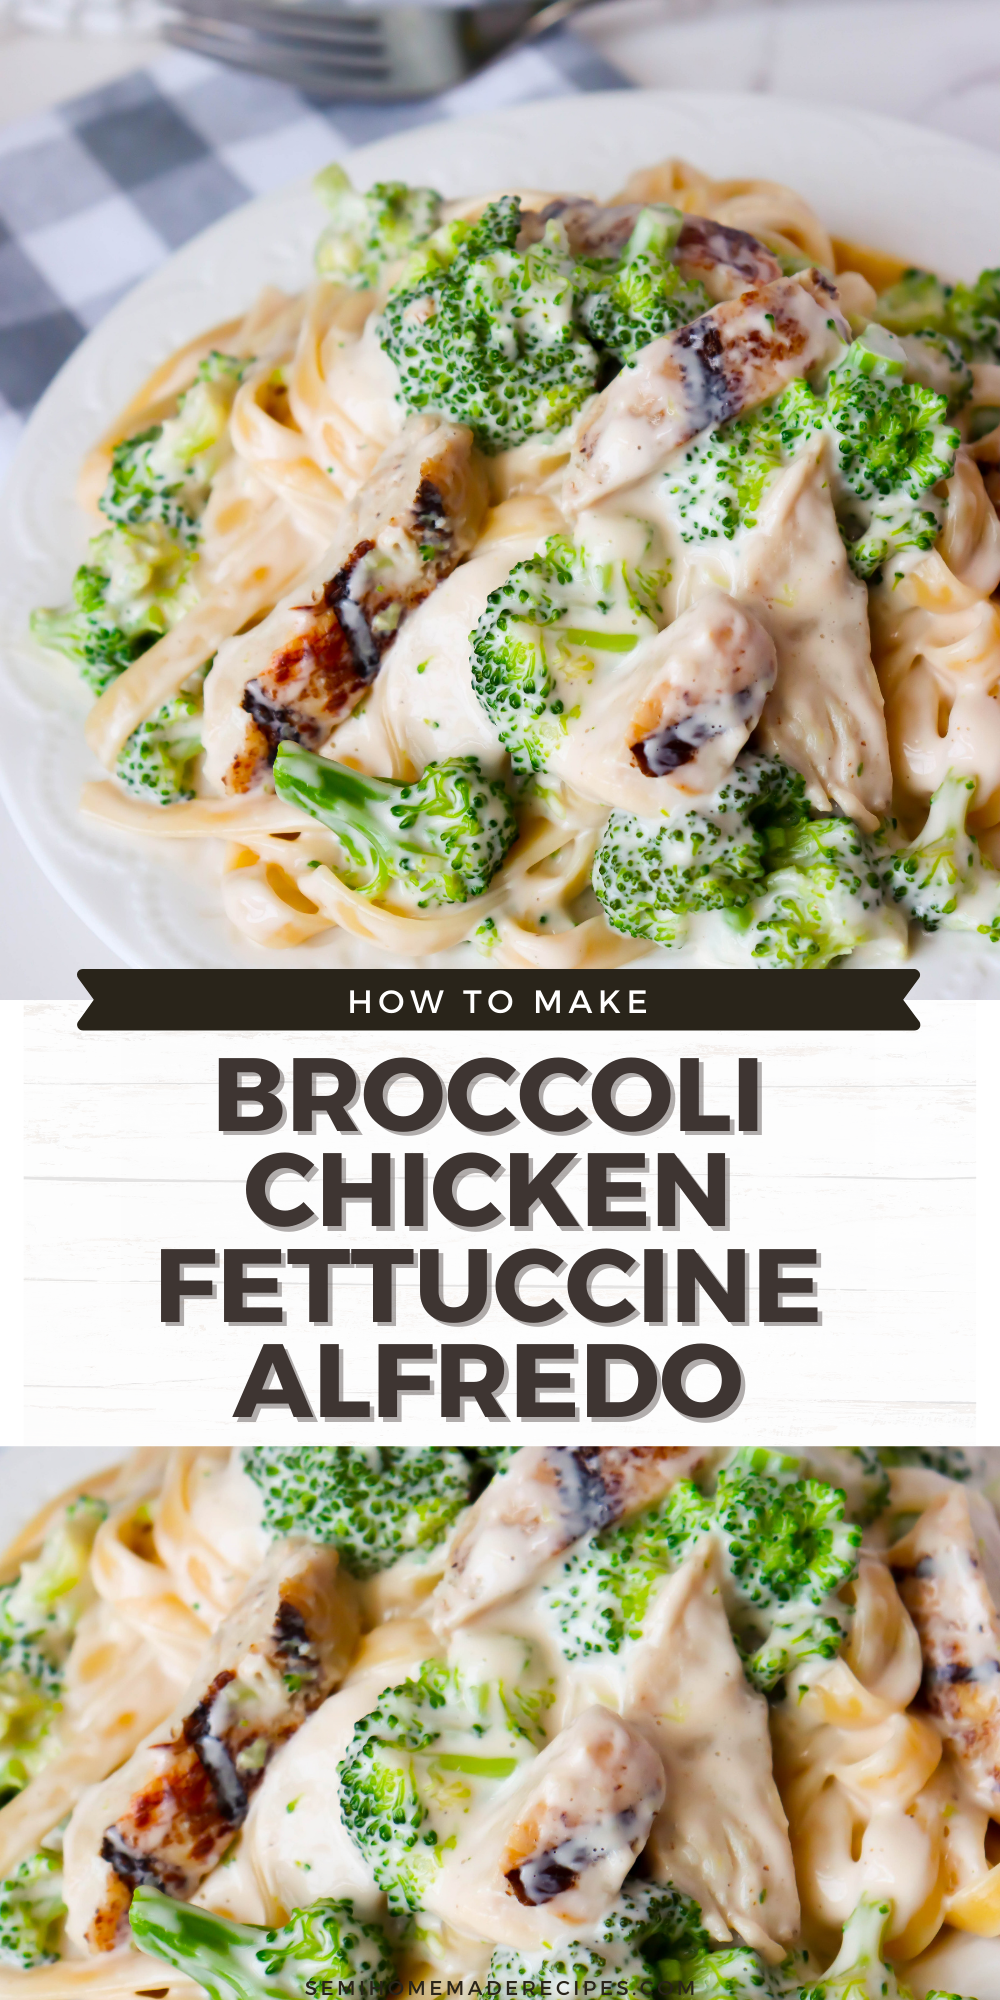 Ready for a great semi homemade dinner idea? This super easy Broccoli Chicken Fettuccine Alfredo recipe uses your favorite jarred alfredo sauce, frozen broccoli florets, chicken and fettuccini pasta to create a super tasty and fast meal! 